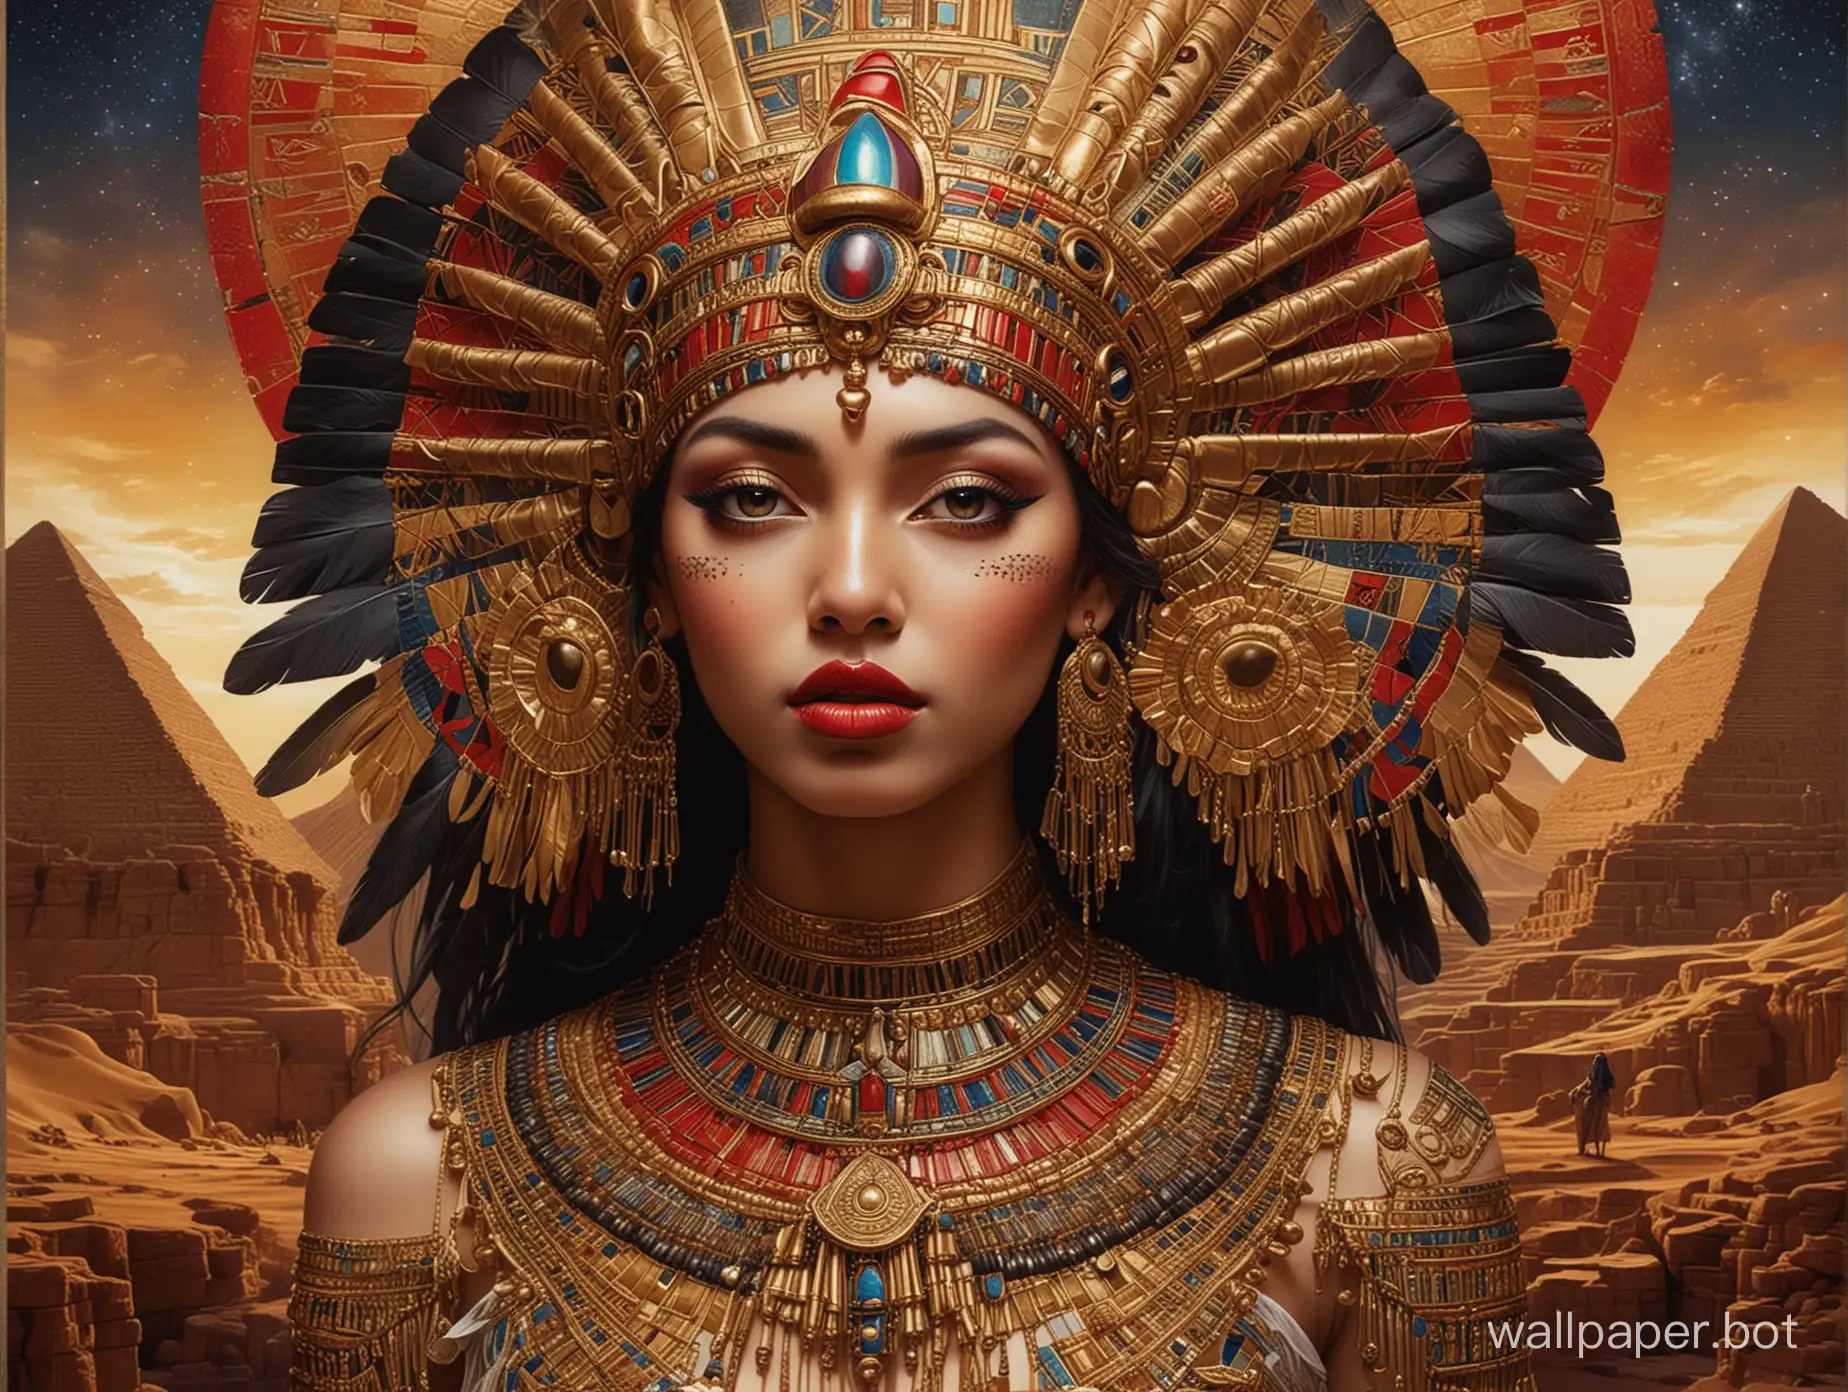 An exquisite conceptual art piece featuring a stunningly beautiful Cleopatra. She is adorned with elaborate headdresses and jewellery, with her skin adorned in gold and shimmering patterns. Her eyes are framed by dark liner, and she wears a vibrant red lip. The background is an abstract, dreamy landscape with a mix of celestial elements and ancient Egyptian symbols, giving the piece a mystical and otherworldly feel., conceptual art